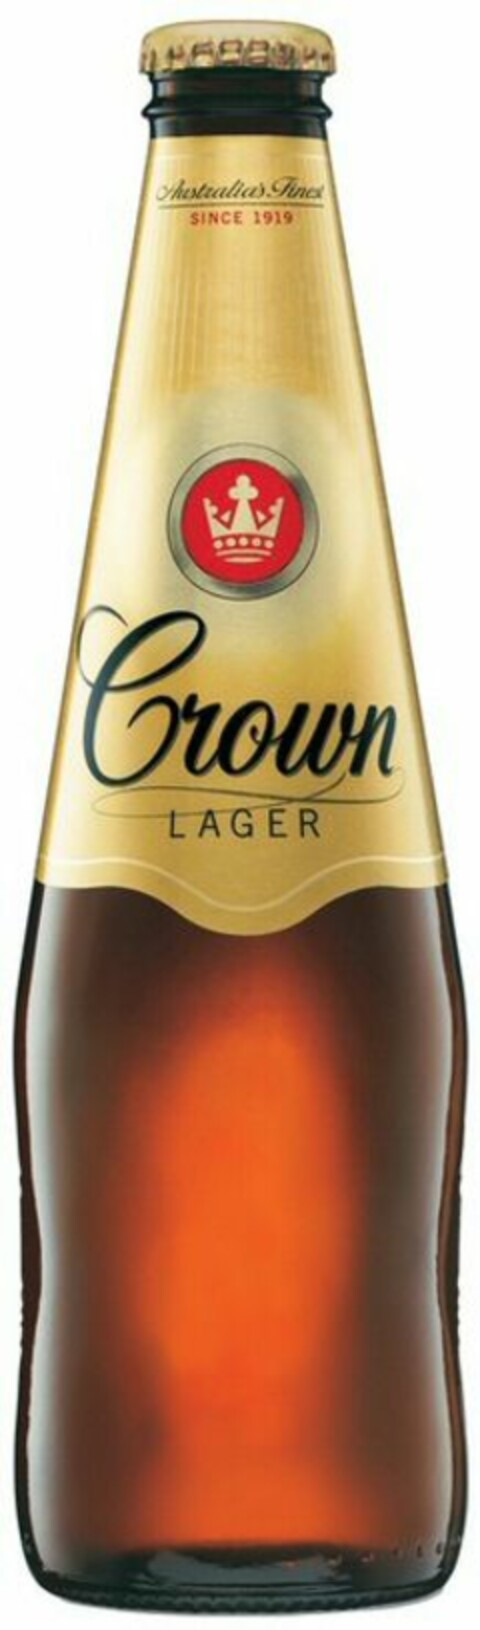 Crown LAGER Logo (WIPO, 10.12.2009)